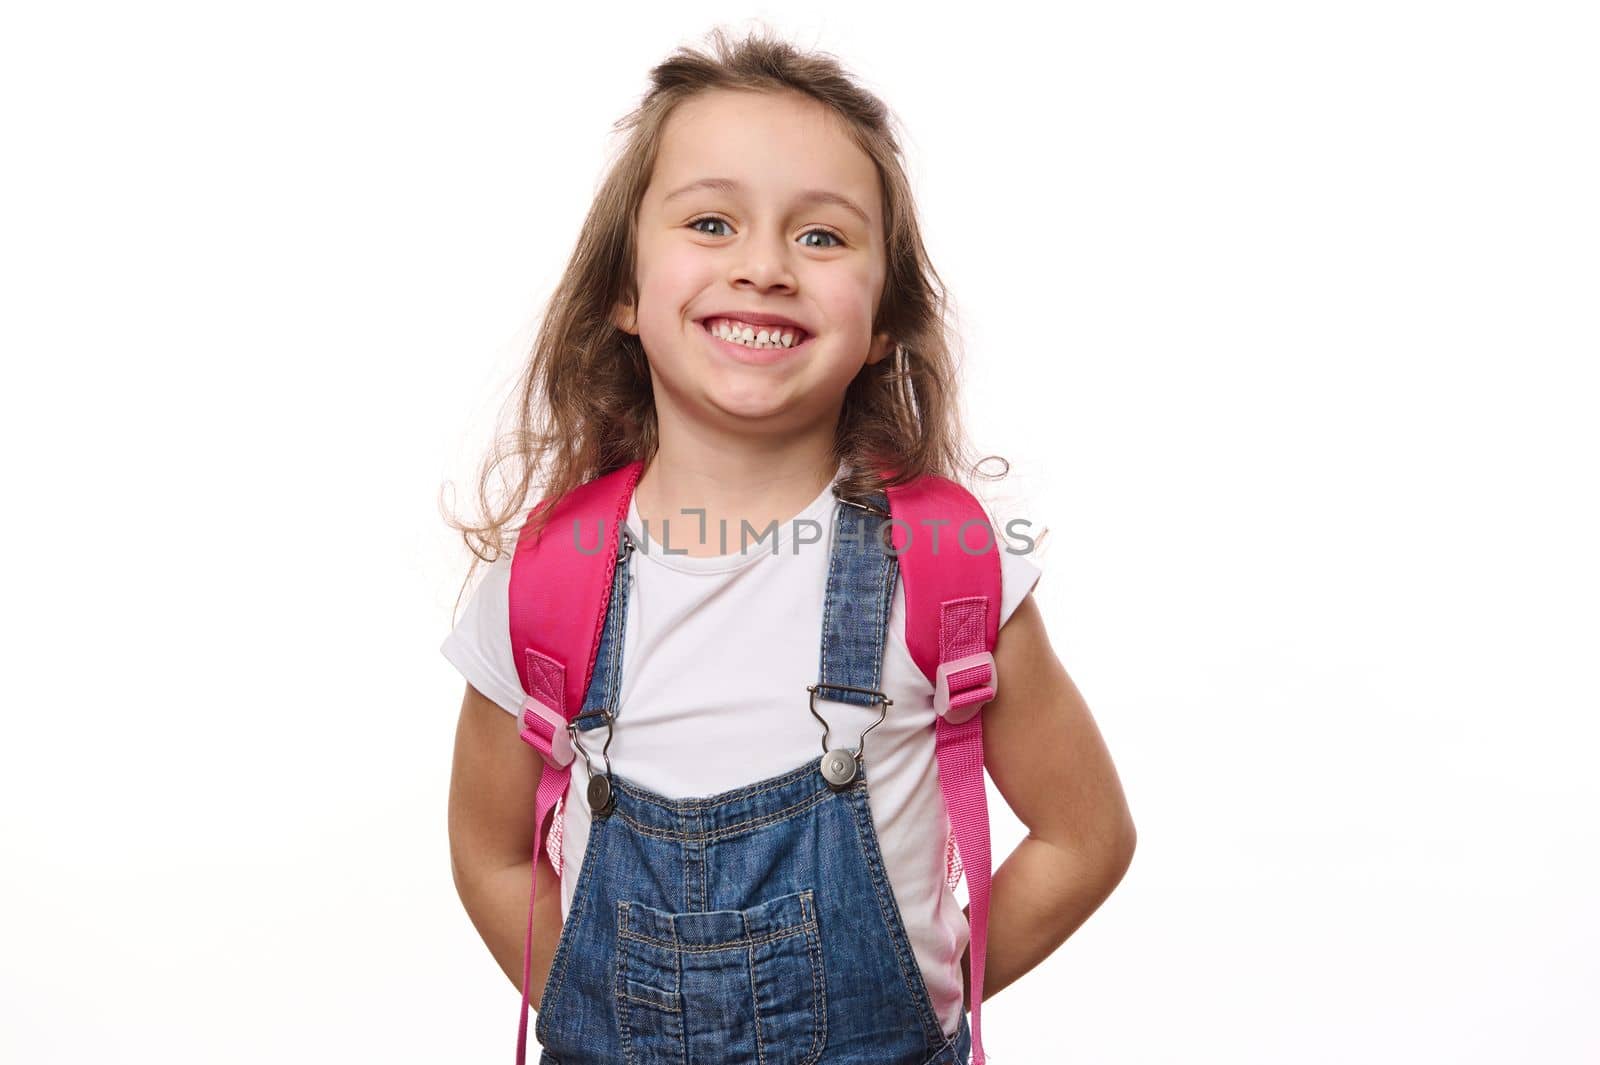 Isolated portrait on white background of a little school child girl with pink backpack, cutely smiling looking at camera by artgf